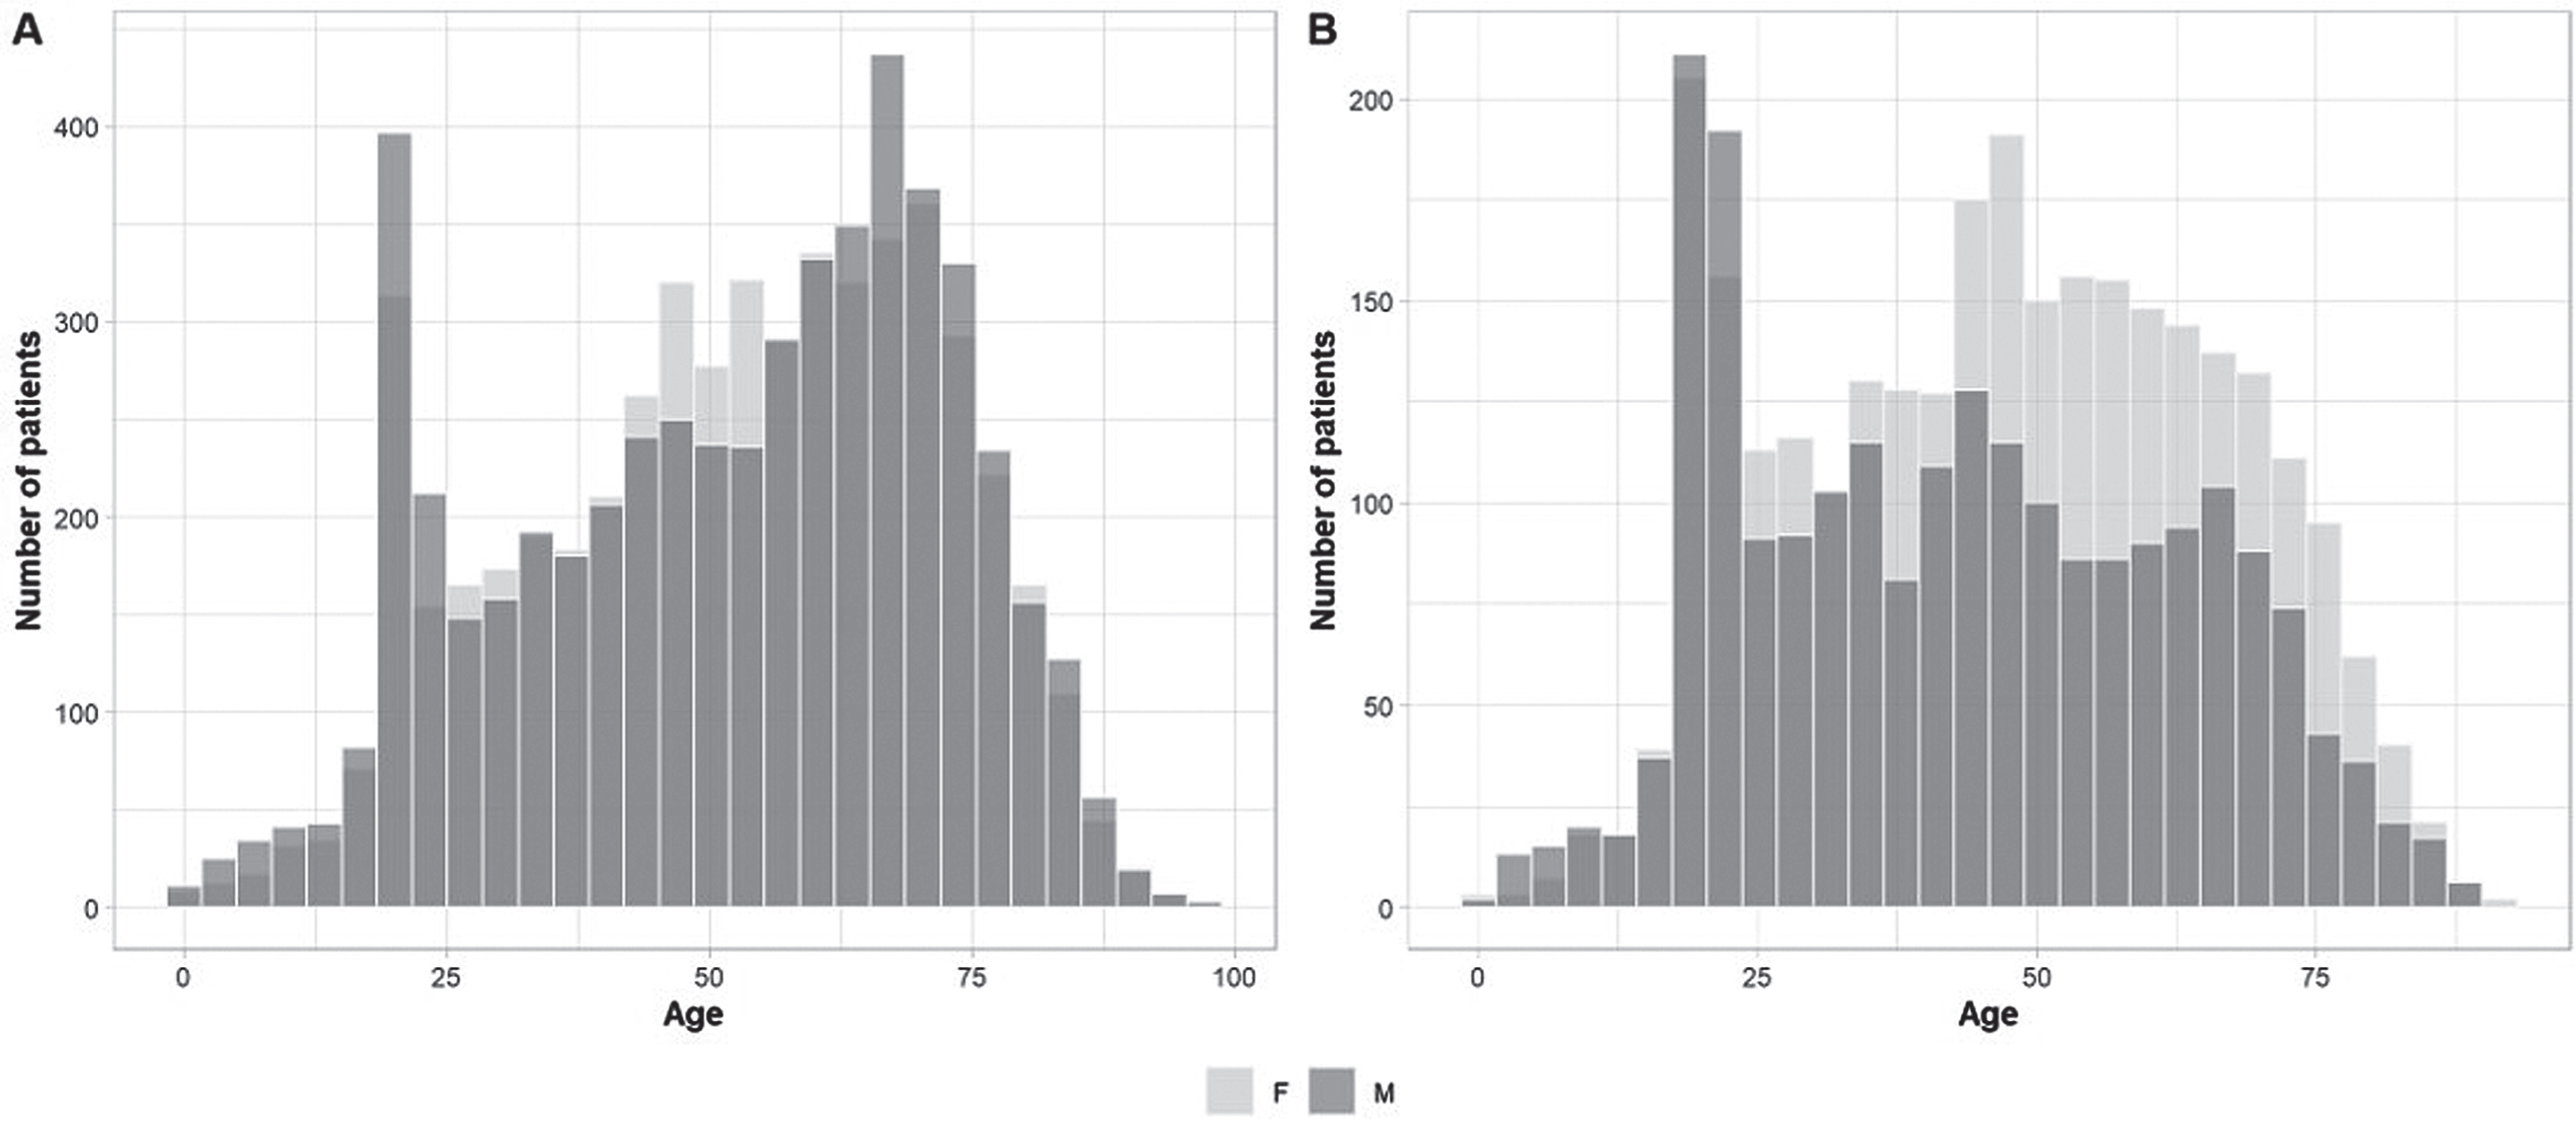 Age and sex referral histograms. Age distribution by sex for the entire referral cohort (A) versus the normal EDX cohort (B). Histogram presenting similar age distribution by sex in all tested patients (A), with however a higher percentage of females than males in the middle-aged groups (B).